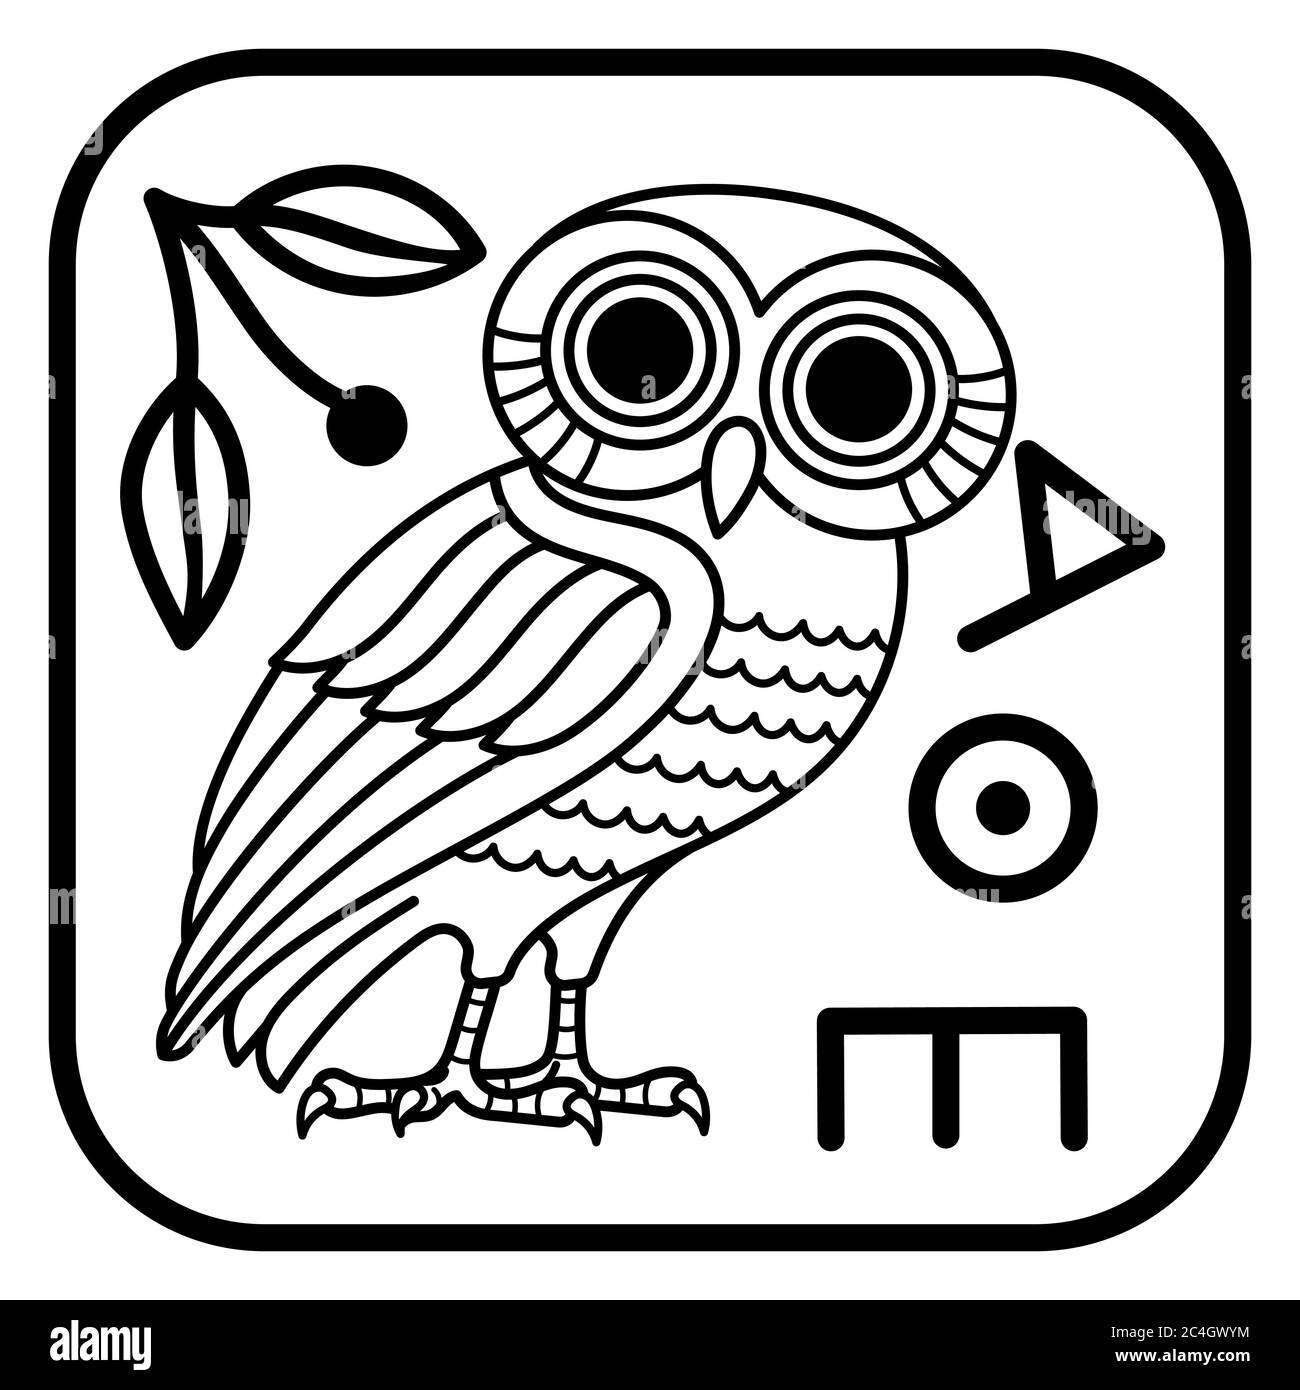 Greek ancient coin from Athens, vintage illustration. Old engraved illustration of an owl and an olive tree branch Stock Vector